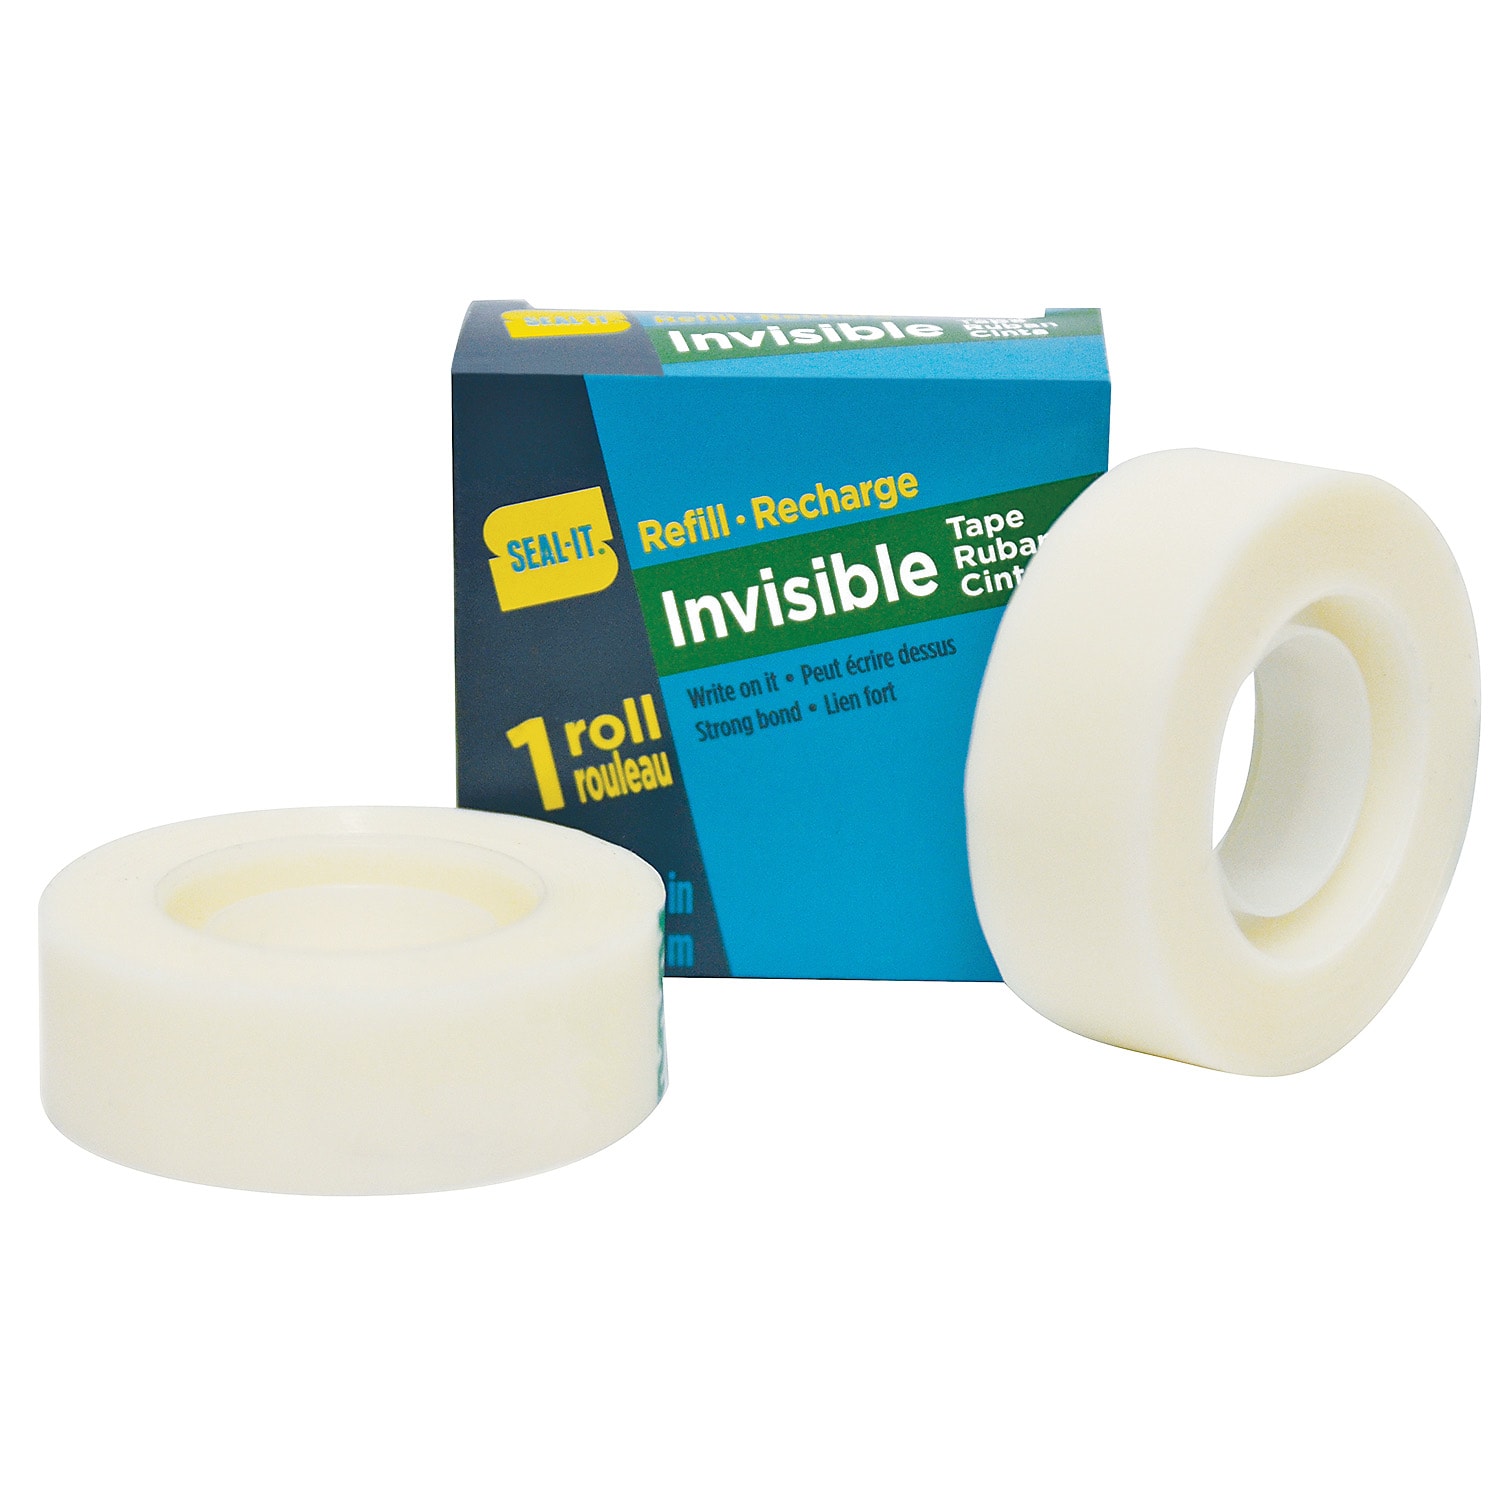 Seal-it Invisible Tape Refill 44101  - 3/4"x33m - Each